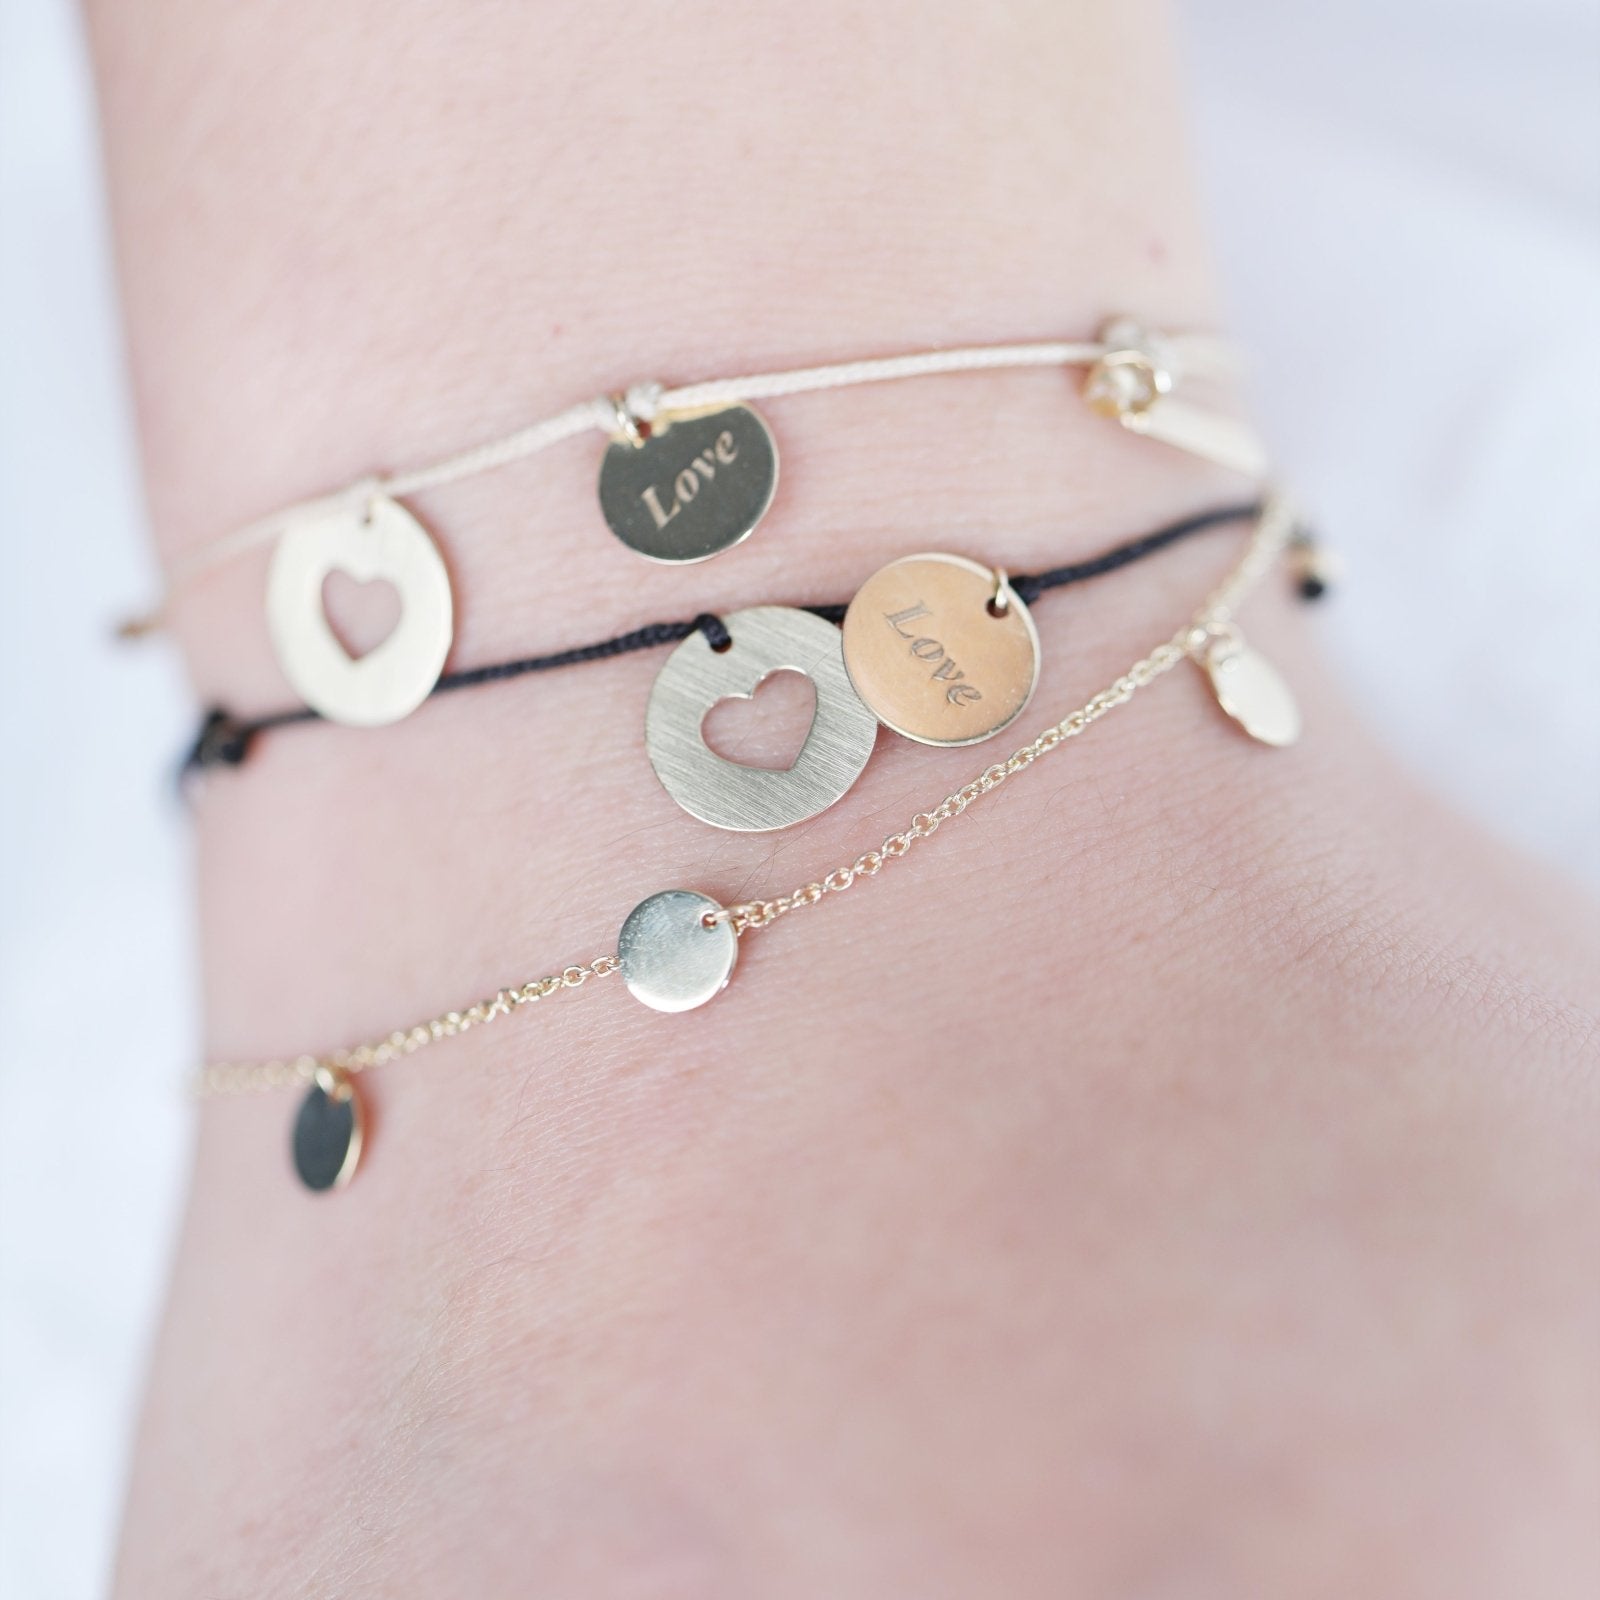 Love Charm Bracelet in Solid Yellow Gold Bracelets Estella Collection 17660 10k 14k Personalized Jewelry #tag4# #tag5# #tag6# #tag7# #tag8# #tag9# #tag10# Tan 10k Yellow Gold